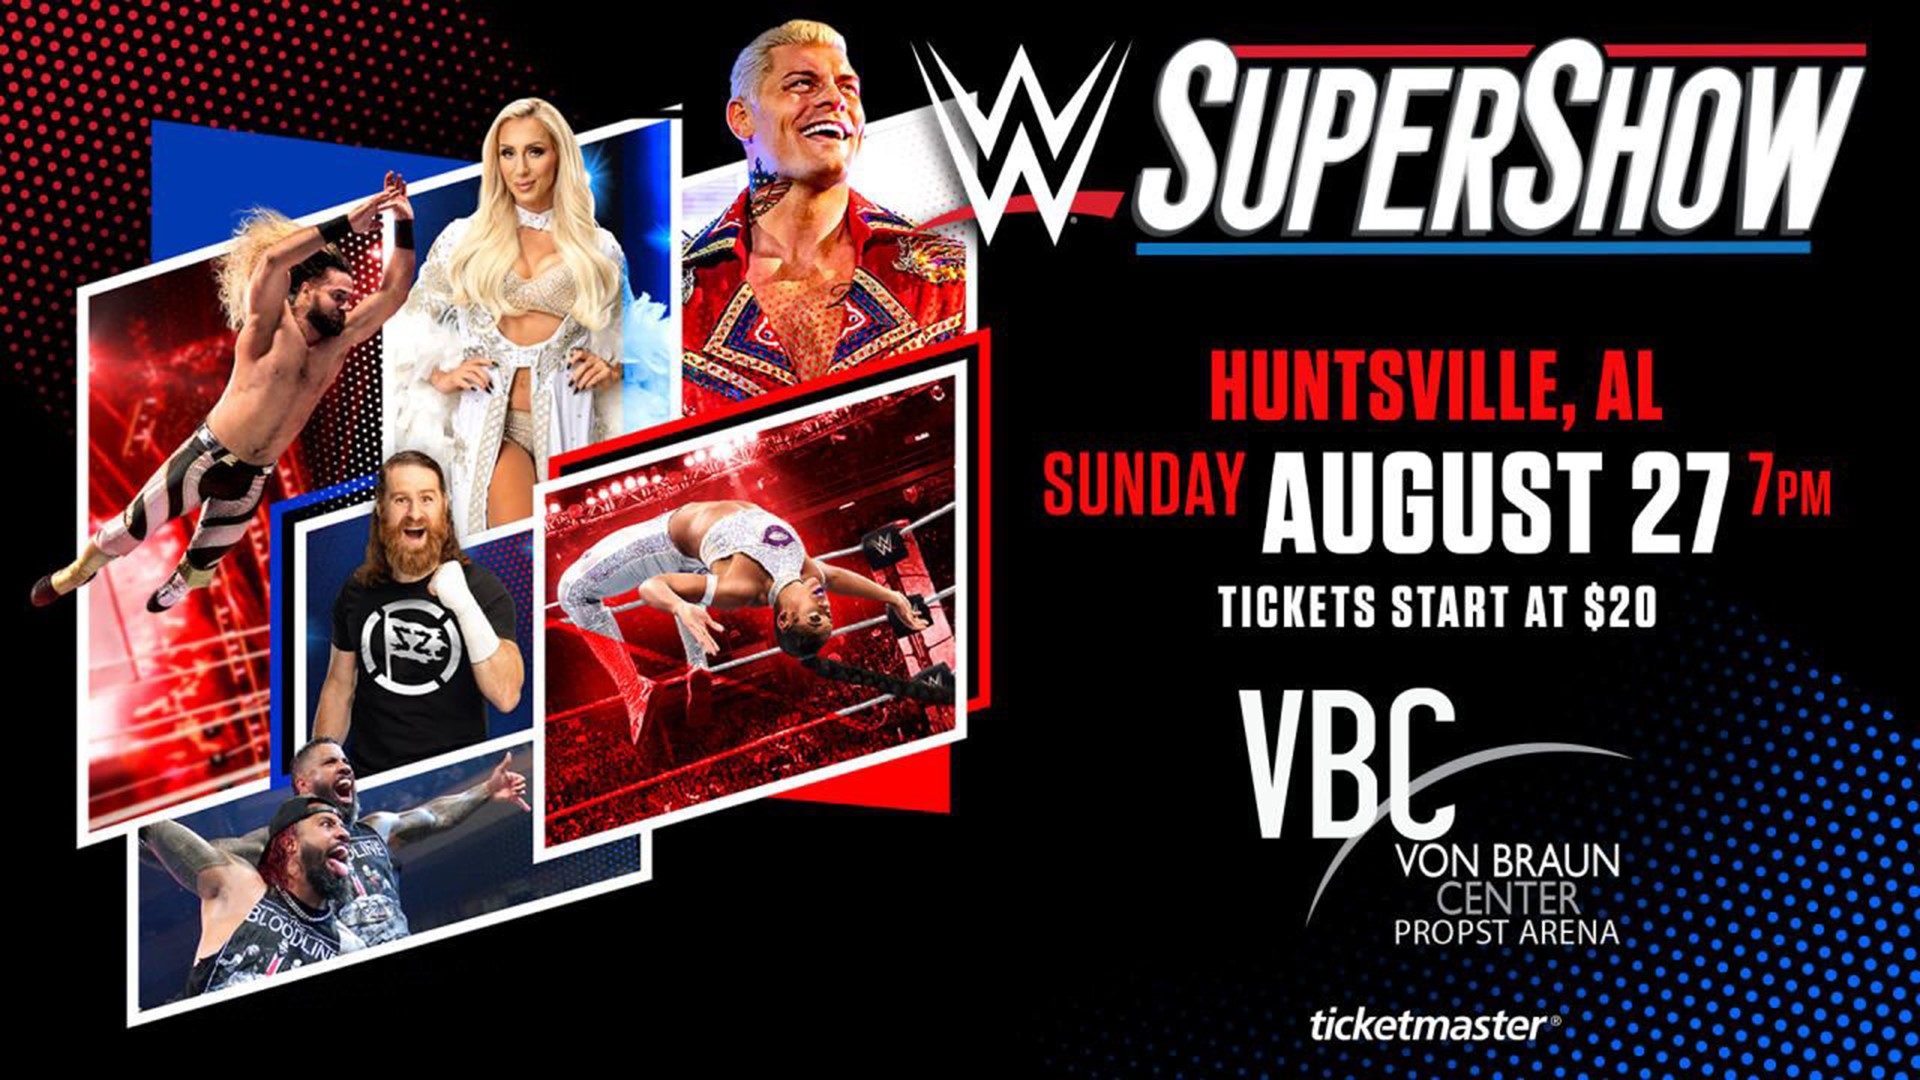 Enter to win free tickets to WWE Supershow in Huntsville rocketcitynow